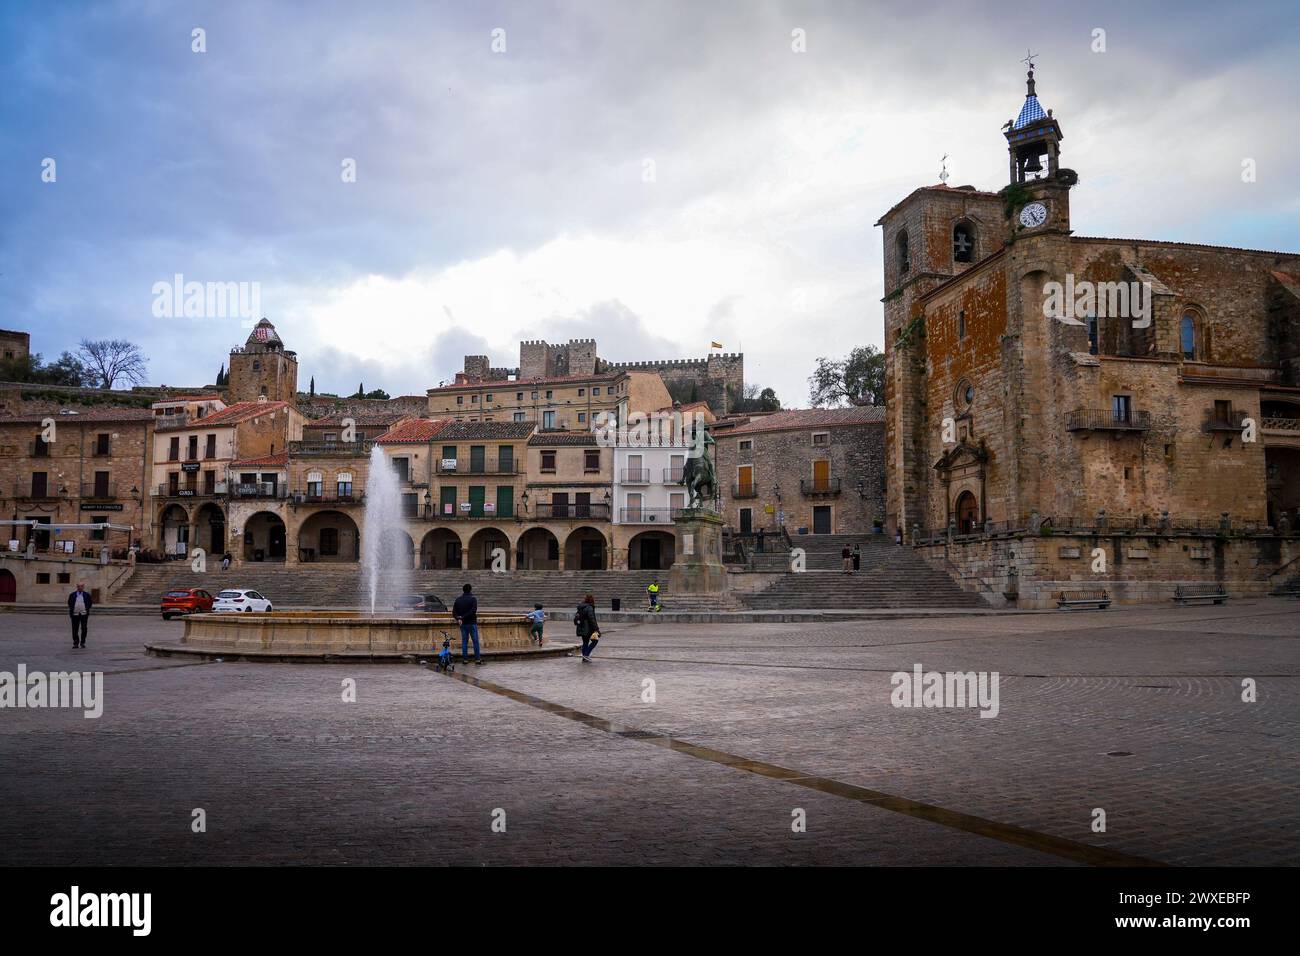 Trujillo Plaza Mayor surrounded by palaces and the Saint Martin of Tours church. The medieval castle was a location for Game of Thrones. Caceres. Stock Photo